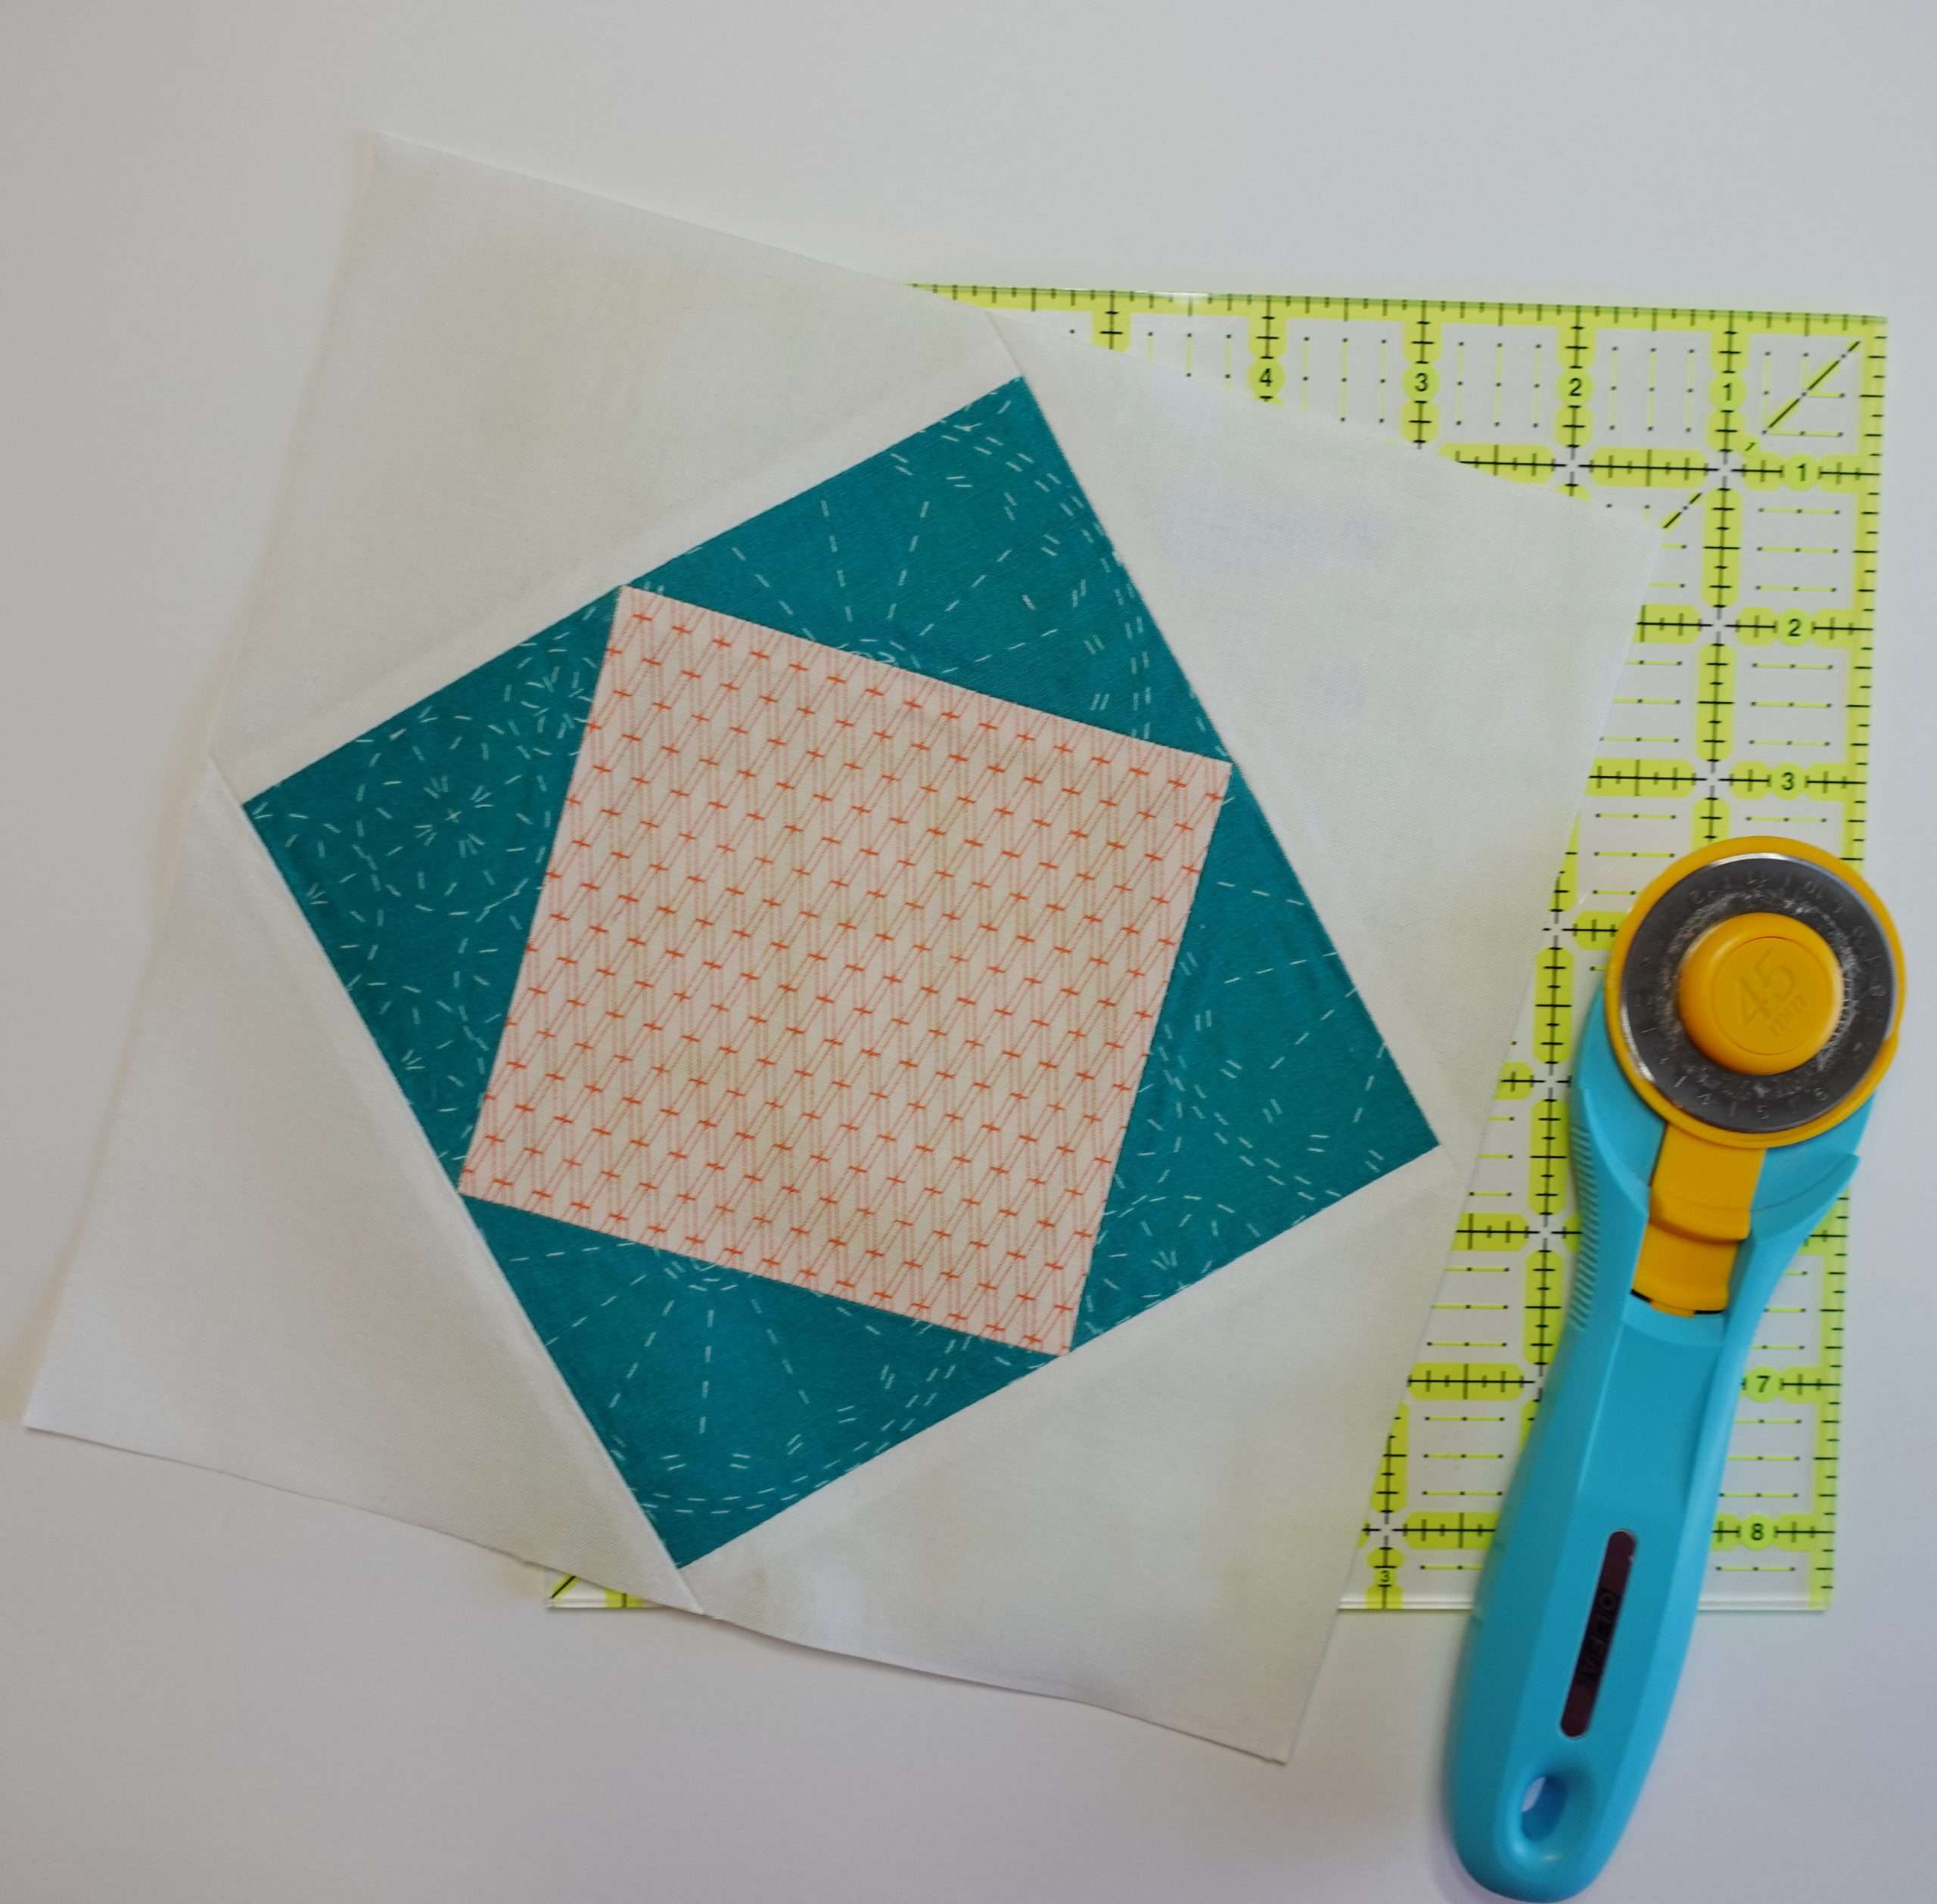 Quilt Block Tutorial: How to Make an Economy Quilt Block